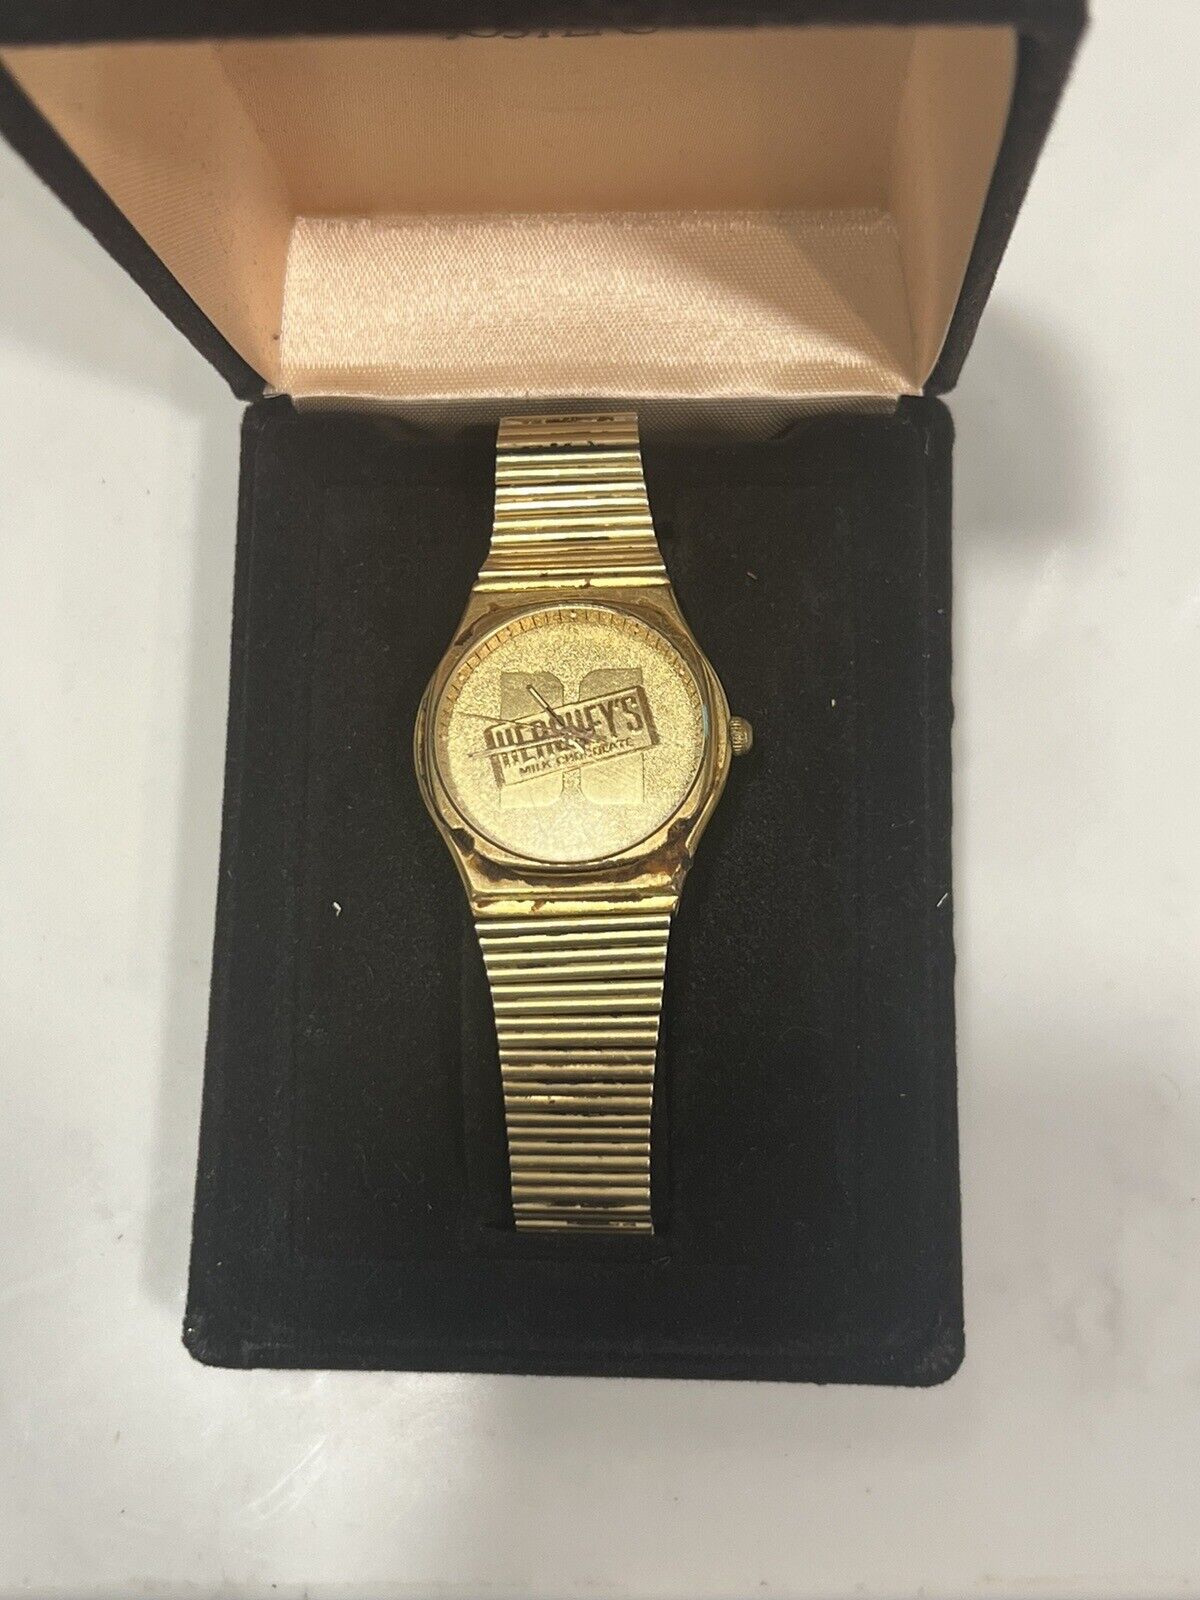 Extremely Rare Vintage Hershey Chocolate Employee Service Award Jostens Watch 